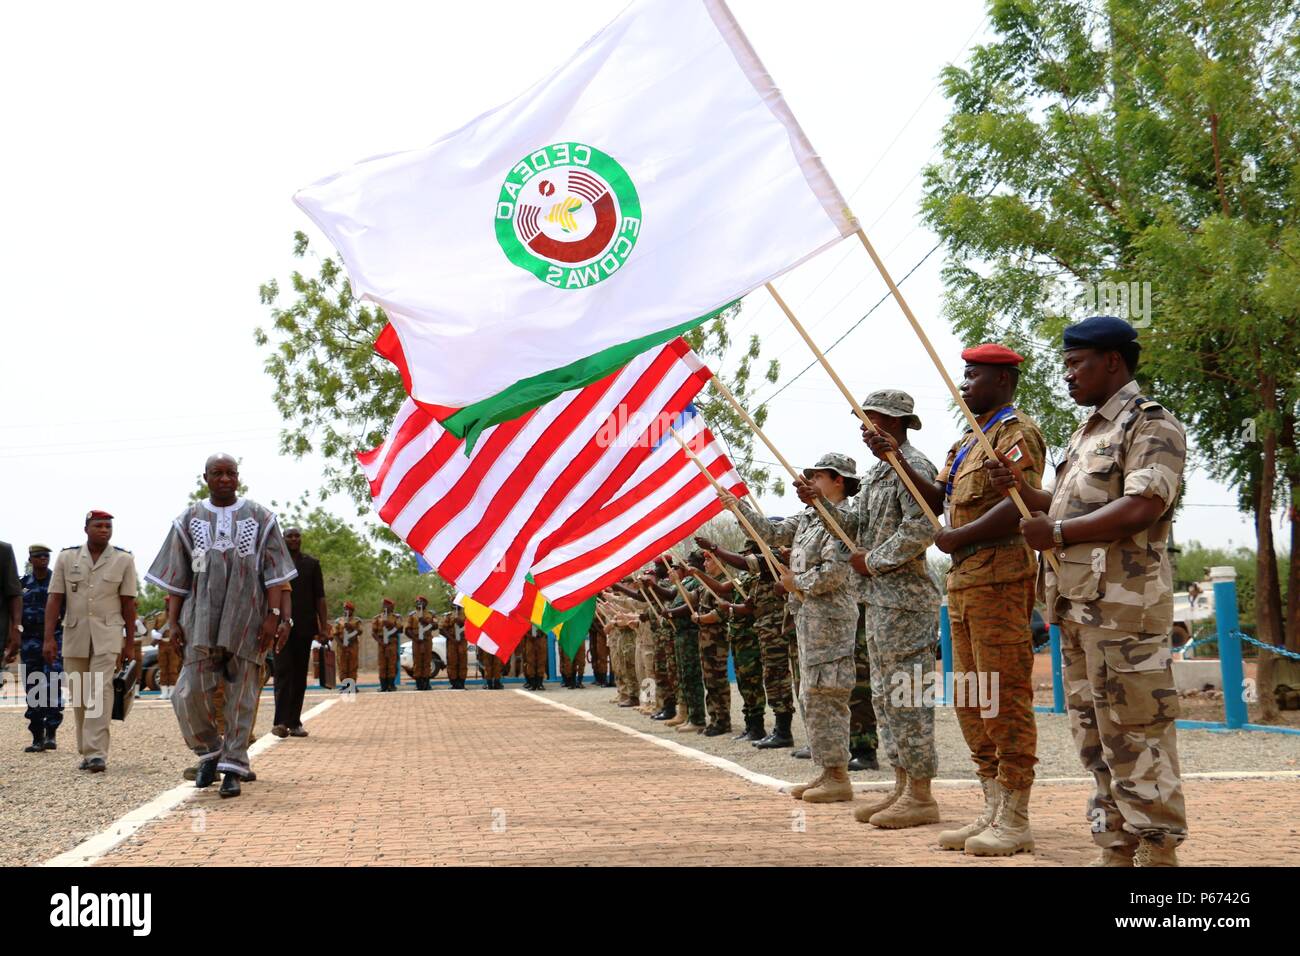 Burkina Faso Prime Minister Paul Kaba Thieba walks past the flags of multinational partners during the Western Accord 2016 Closing Day Ceremony May 13, 2016 at Camp Zagre, Ouagadougou, Burkina Faso. The two-week command post exercise, which began May 2, brought together 15 West African Nations, 7 NATO European countries and the U.S. to work as a multinational headquarters to build interoperability and shared understanding. (U.S. Army photo by Staff Sgt. Candace Mundt/Released) Stock Photo